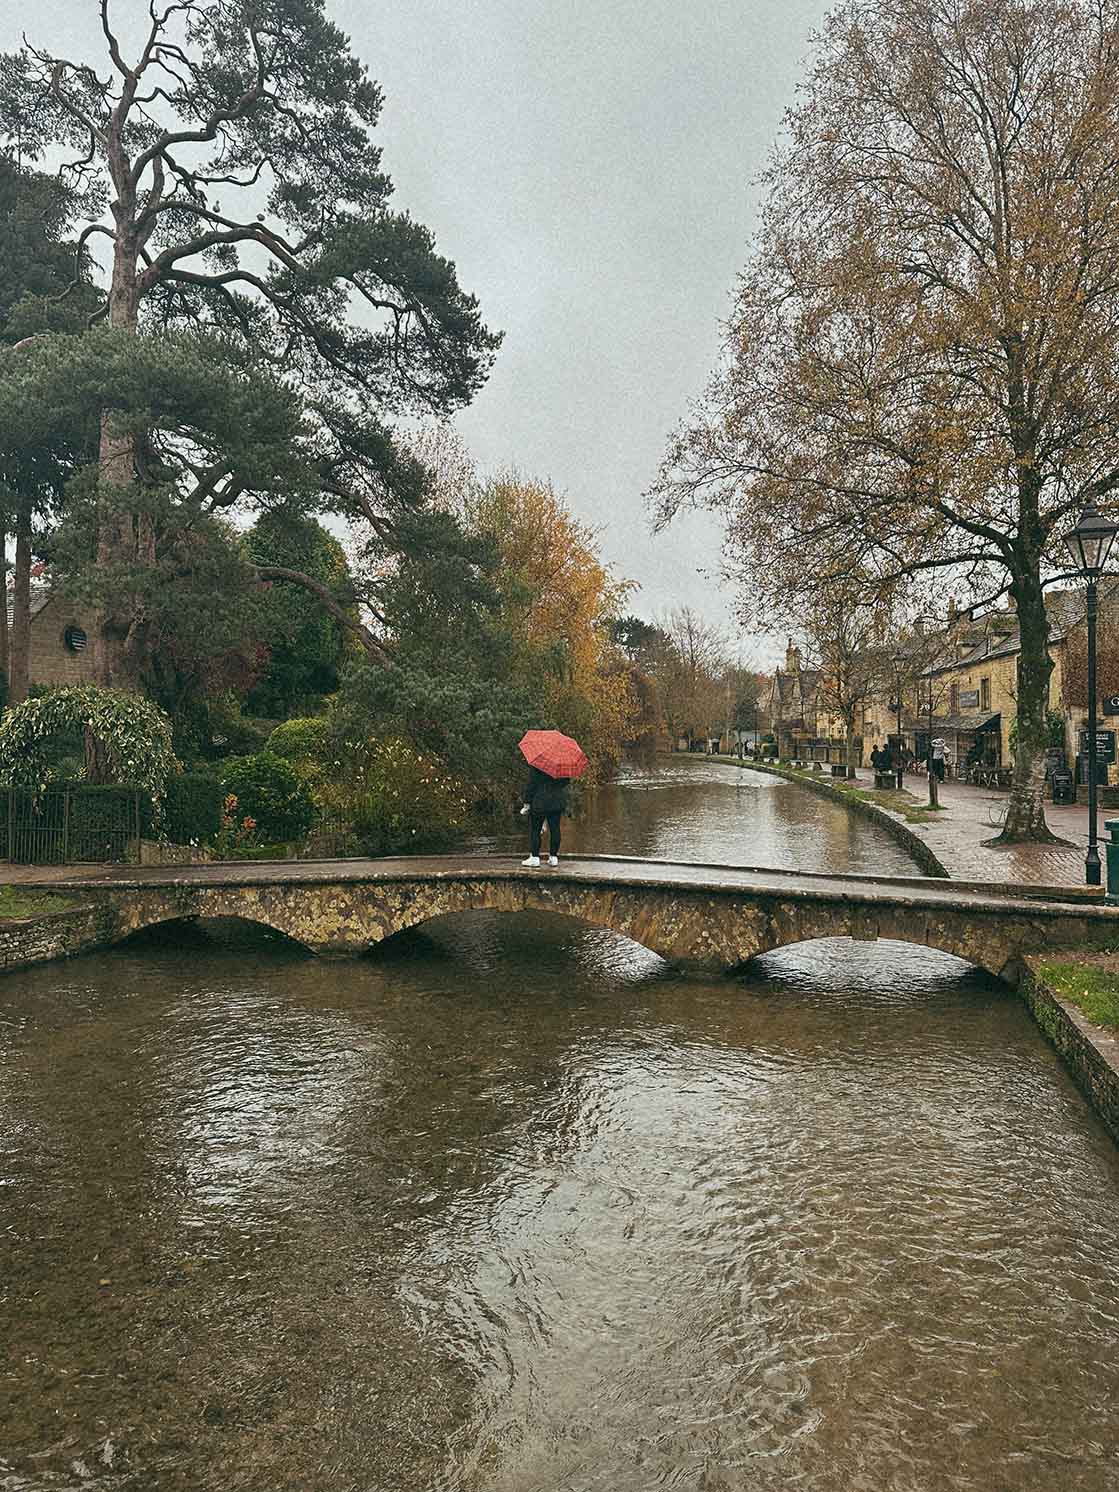 River walks in Bourton-on-the-Water